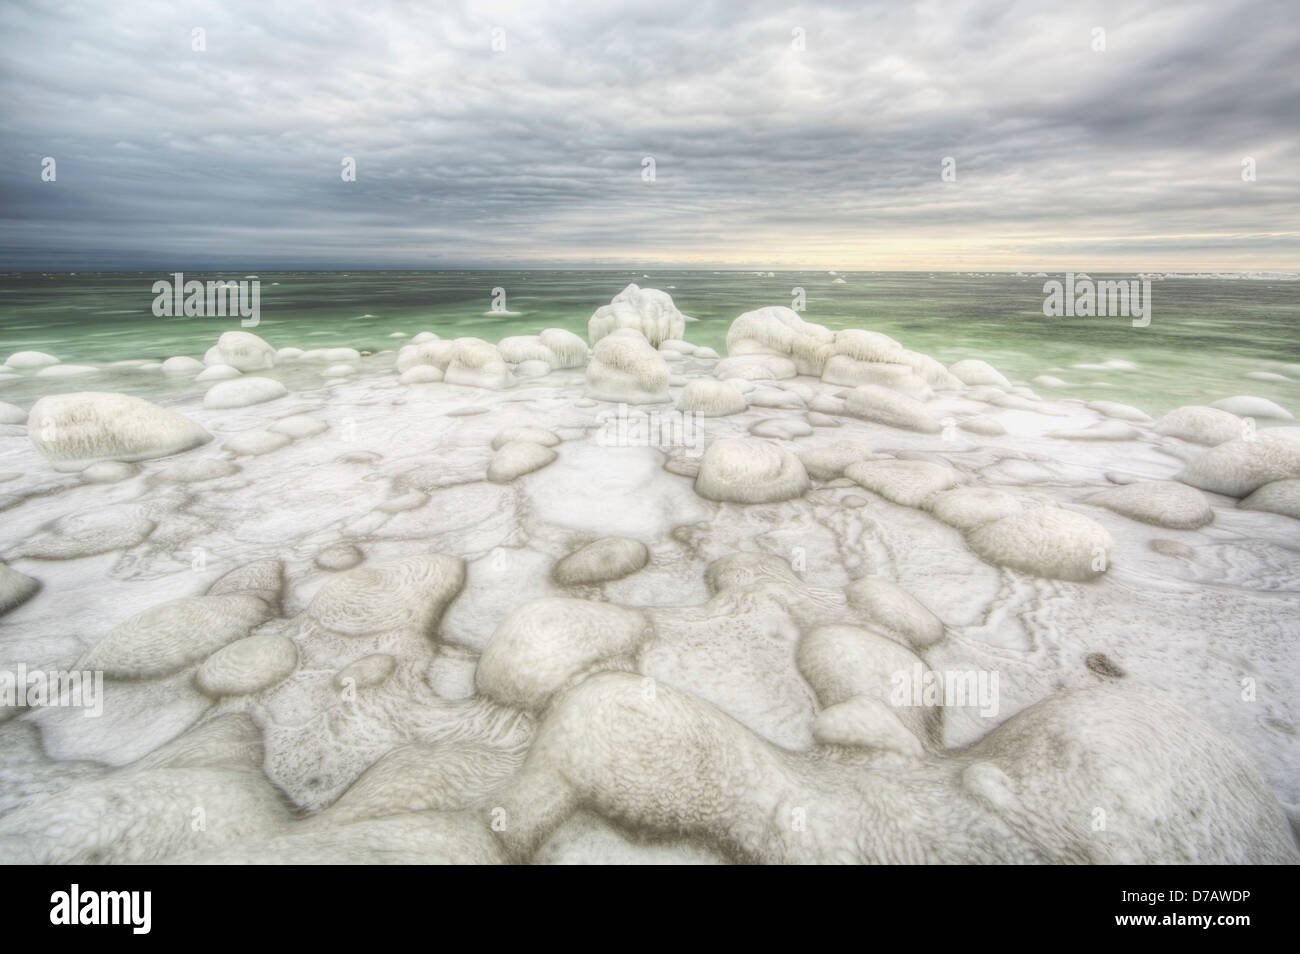 The Green Ice Filled Water Of Hudson's Bay;Manitoba Canada Stock Photo